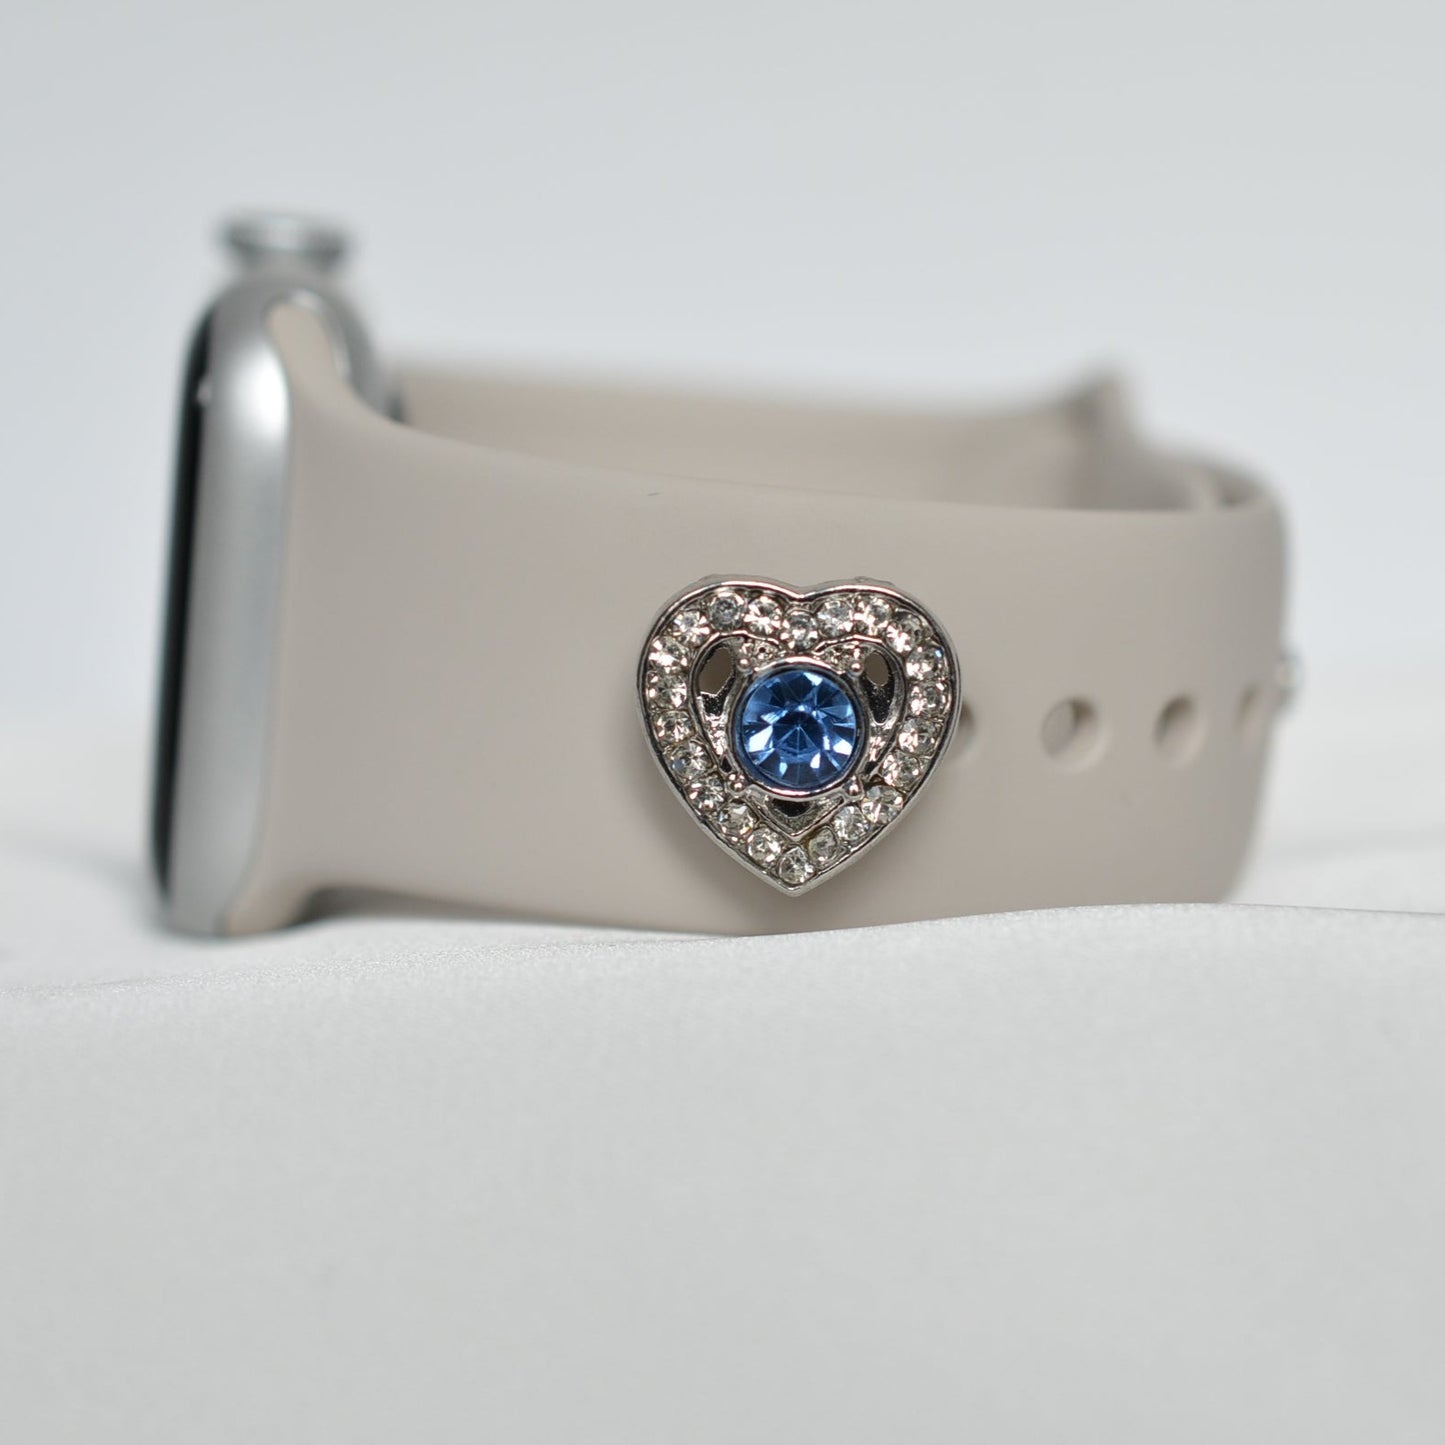 Blue Stone Heart Charm for Belt, Bag and Watch Bands